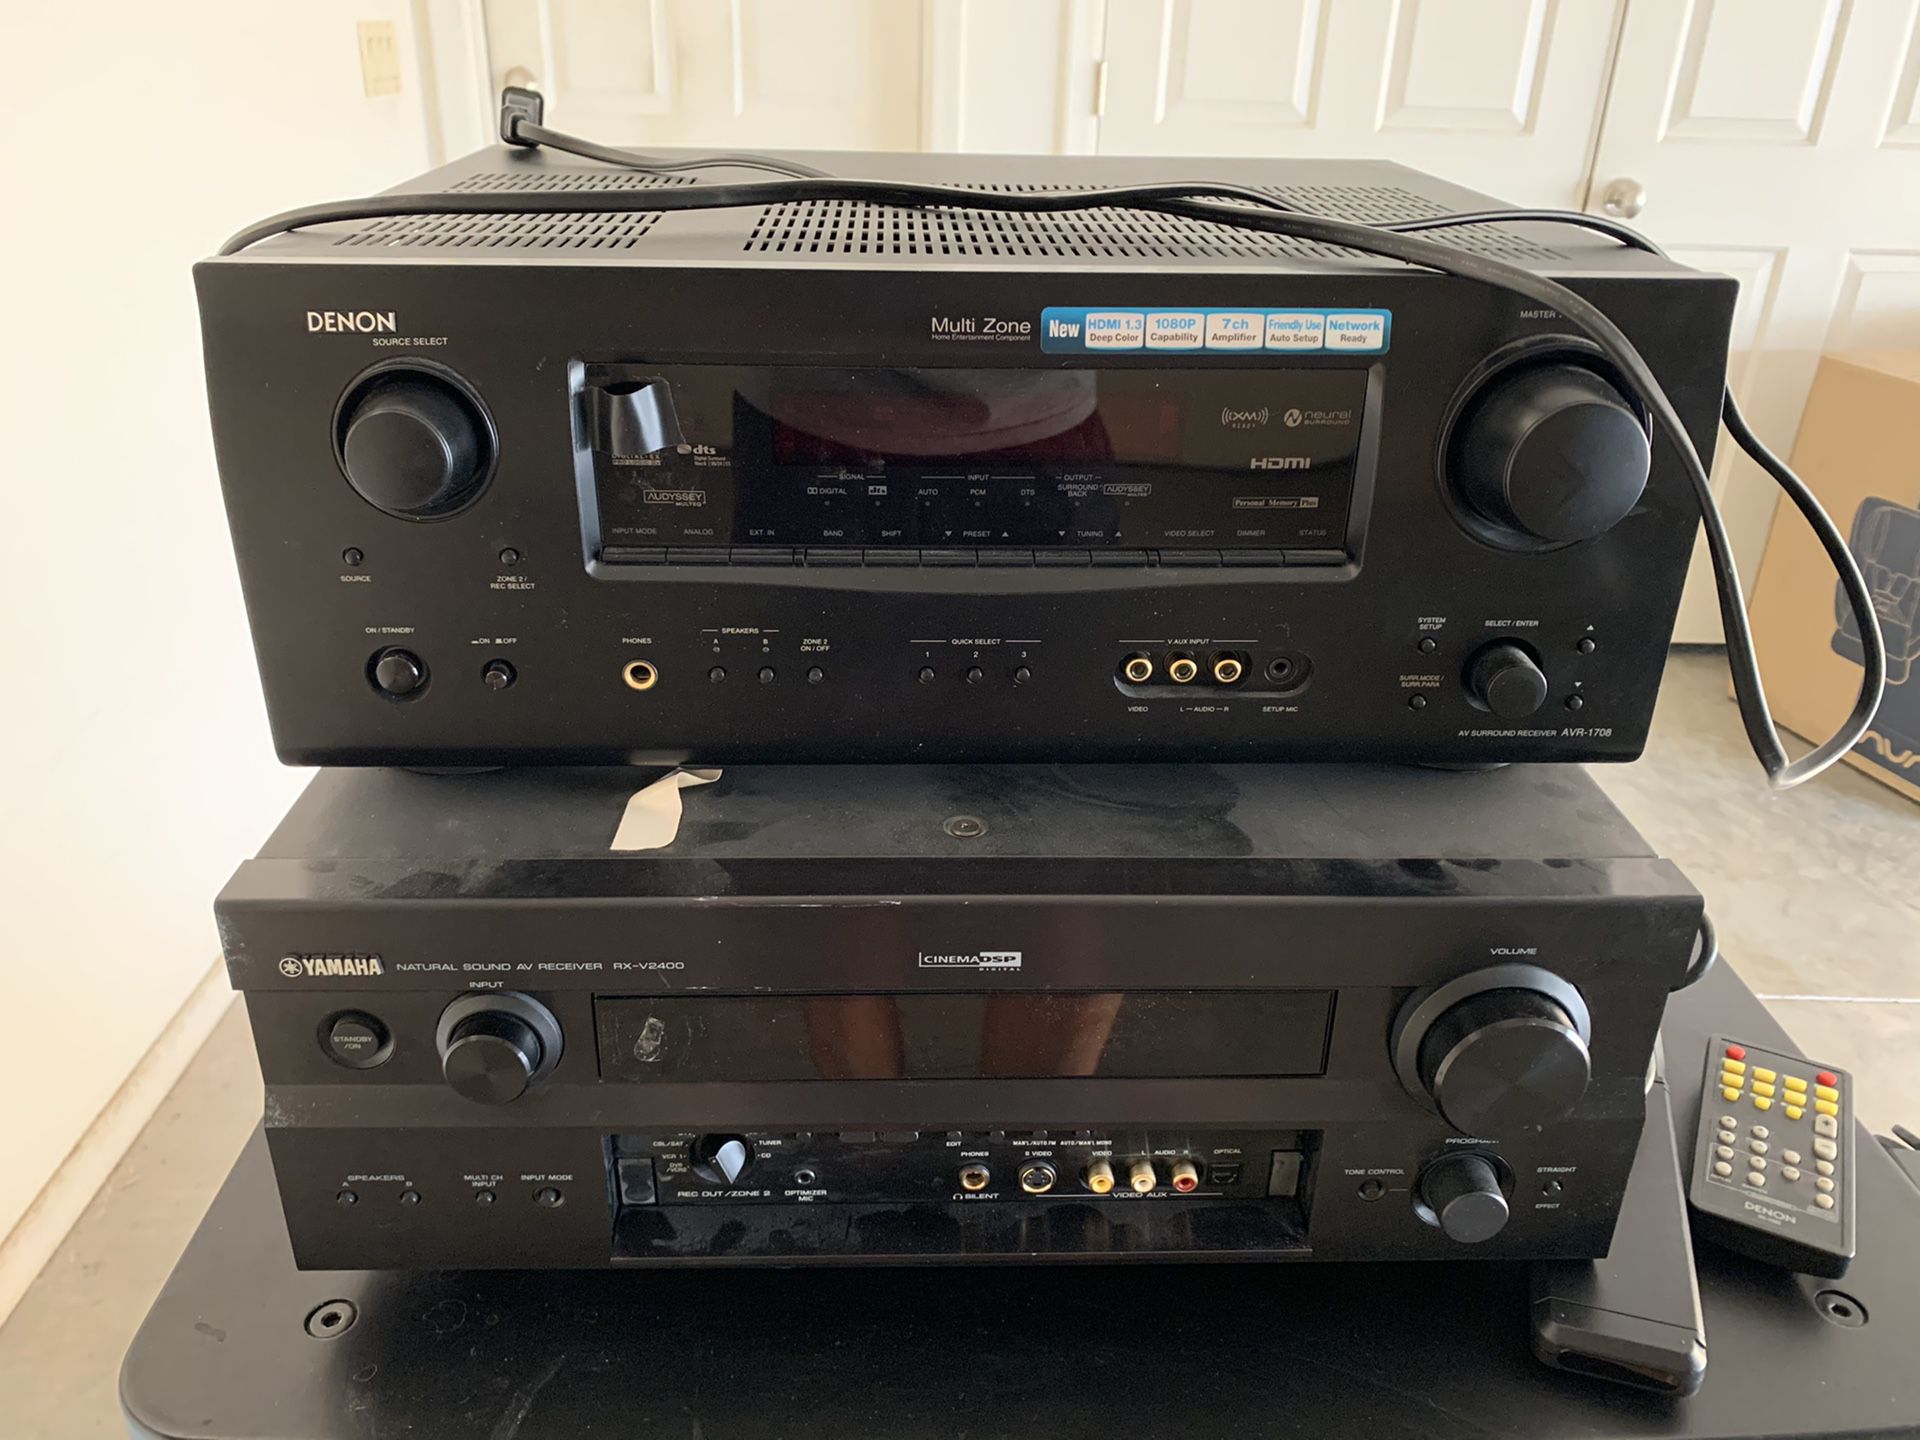 Stereo equipment - receivers, subwoofers, etc